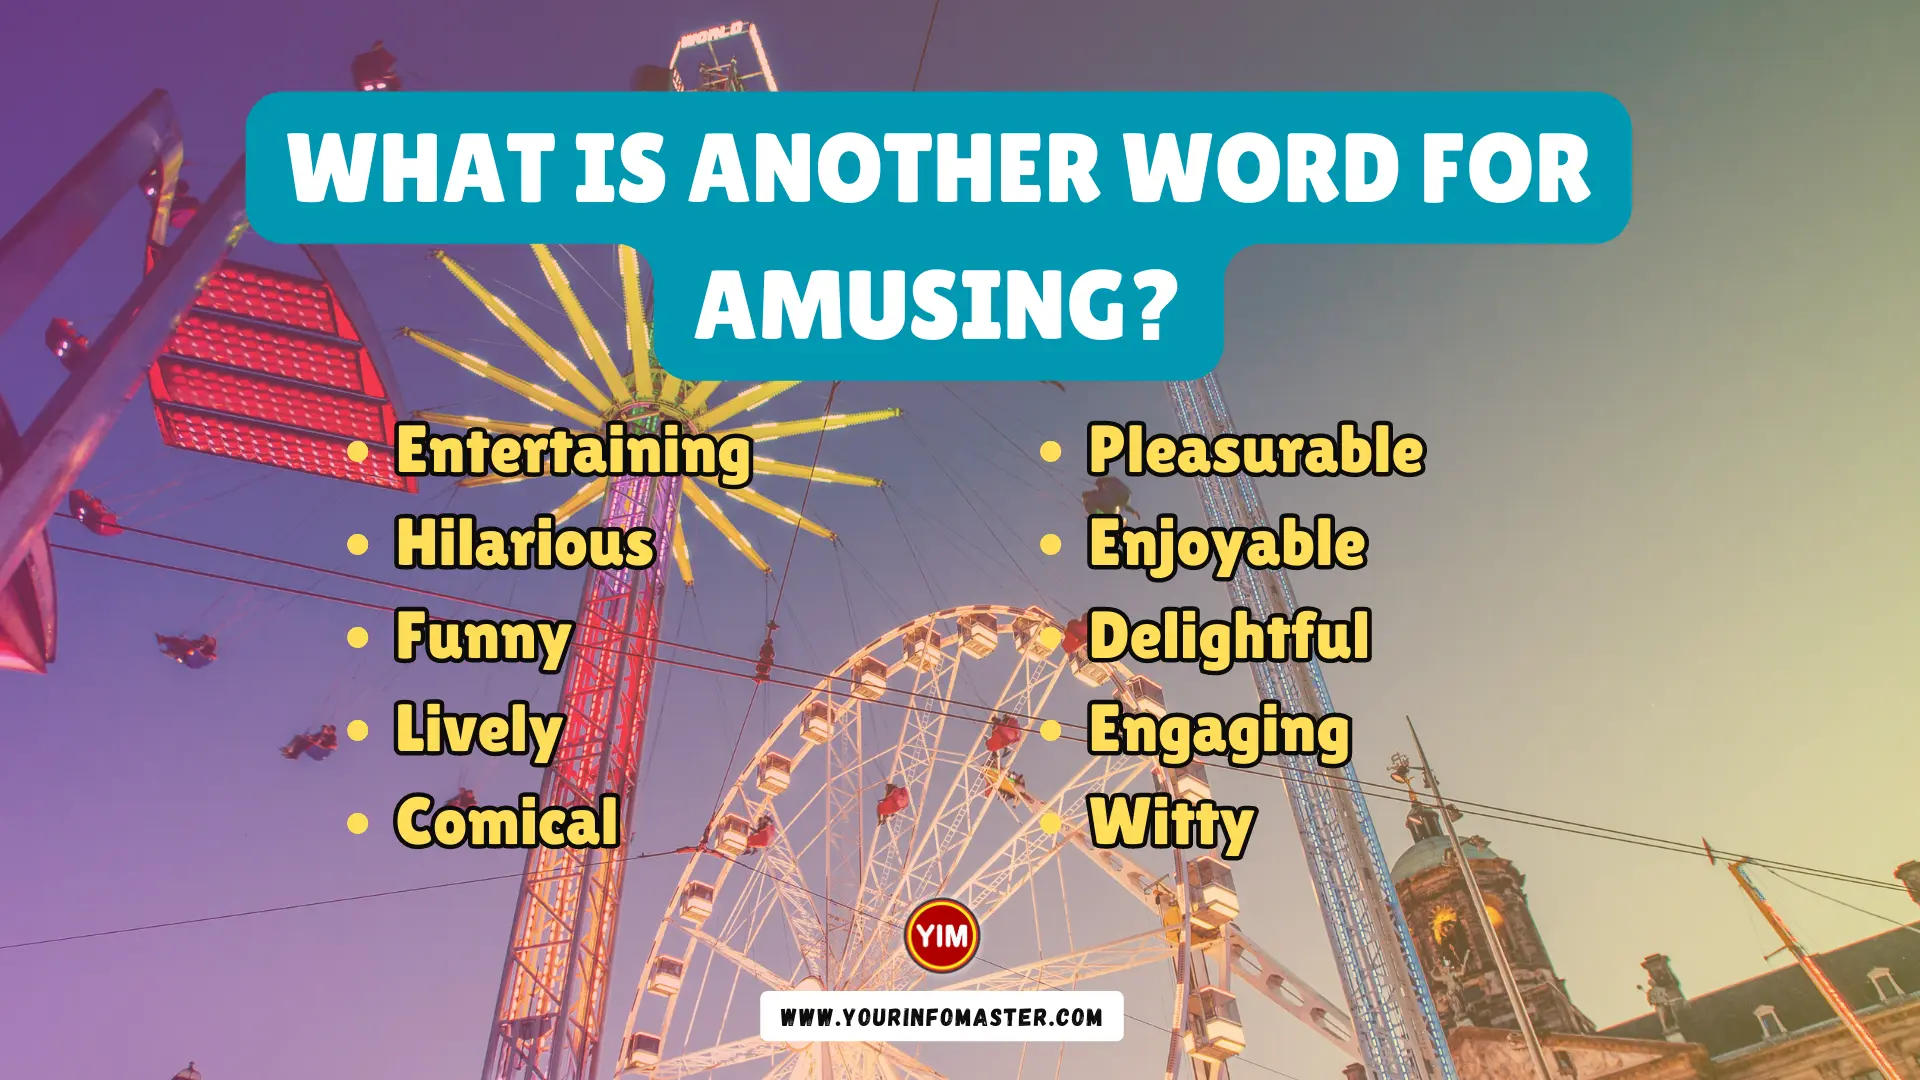 What is another word for Amusing